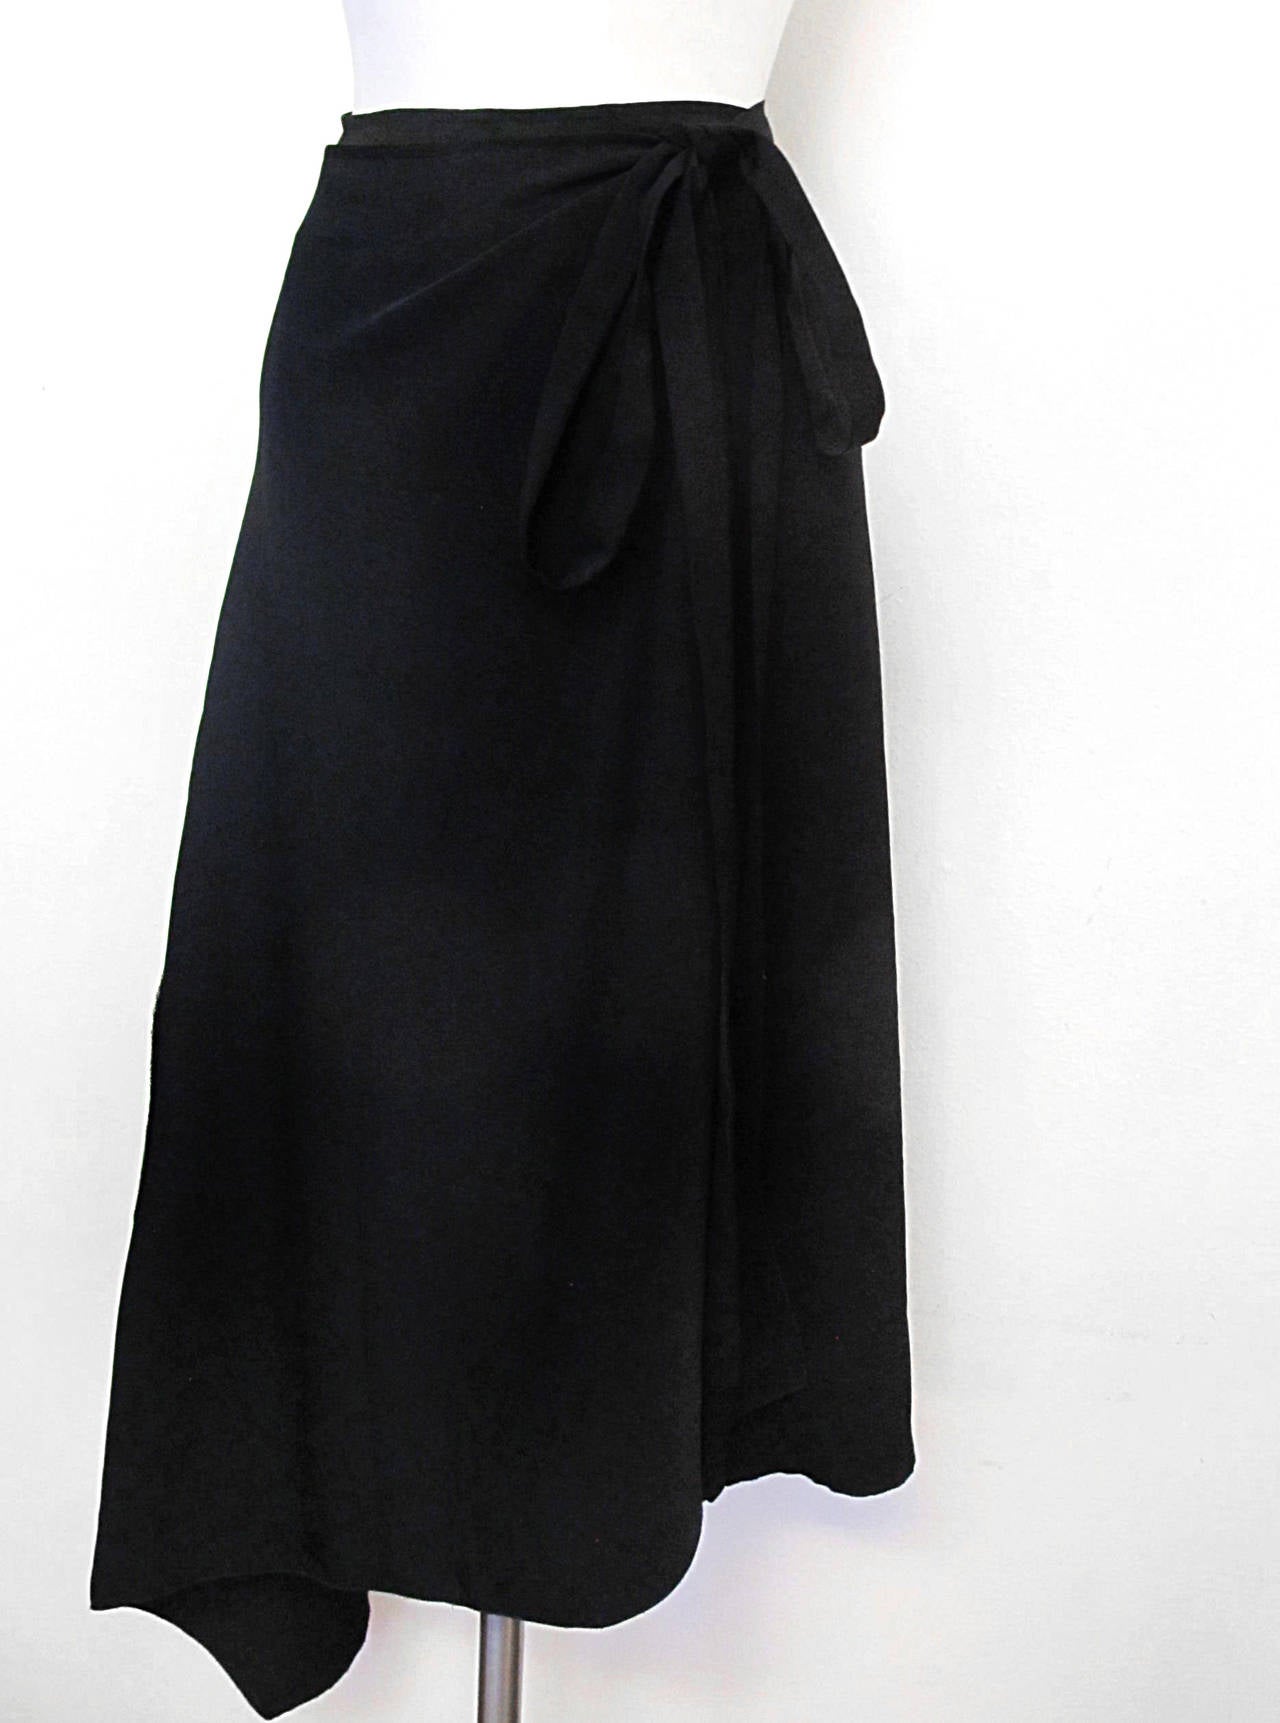 Ivan Grundahl Wraparound Asymmetrical Black Skirt with Spiral Design In Excellent Condition For Sale In San Francisco, CA